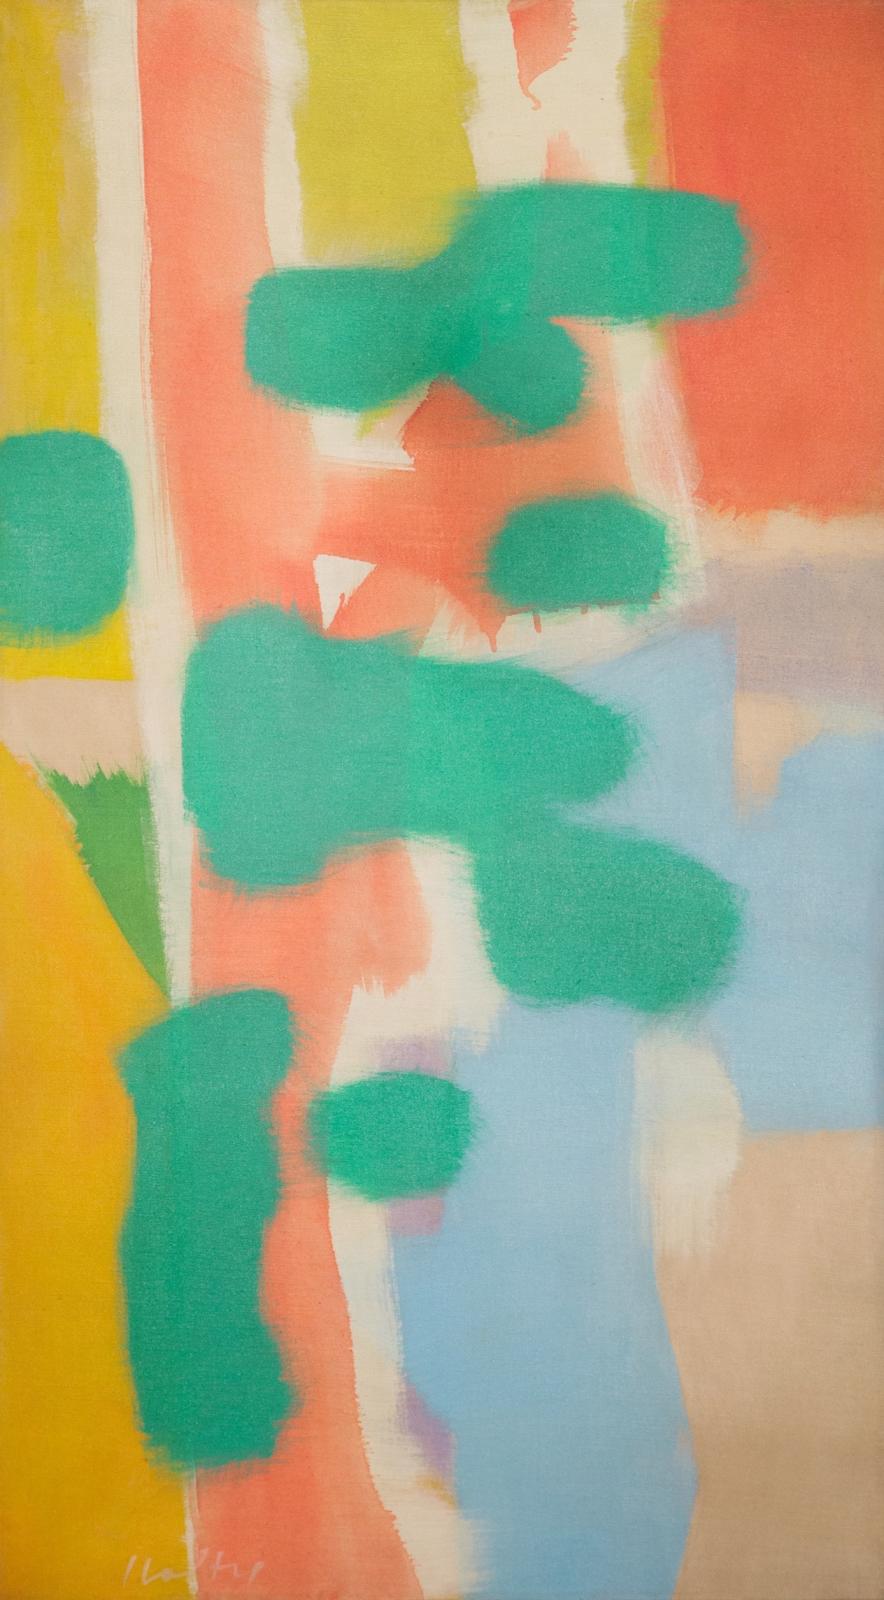 Carl Holty, Untitled #169 (Green, Pink), 1964